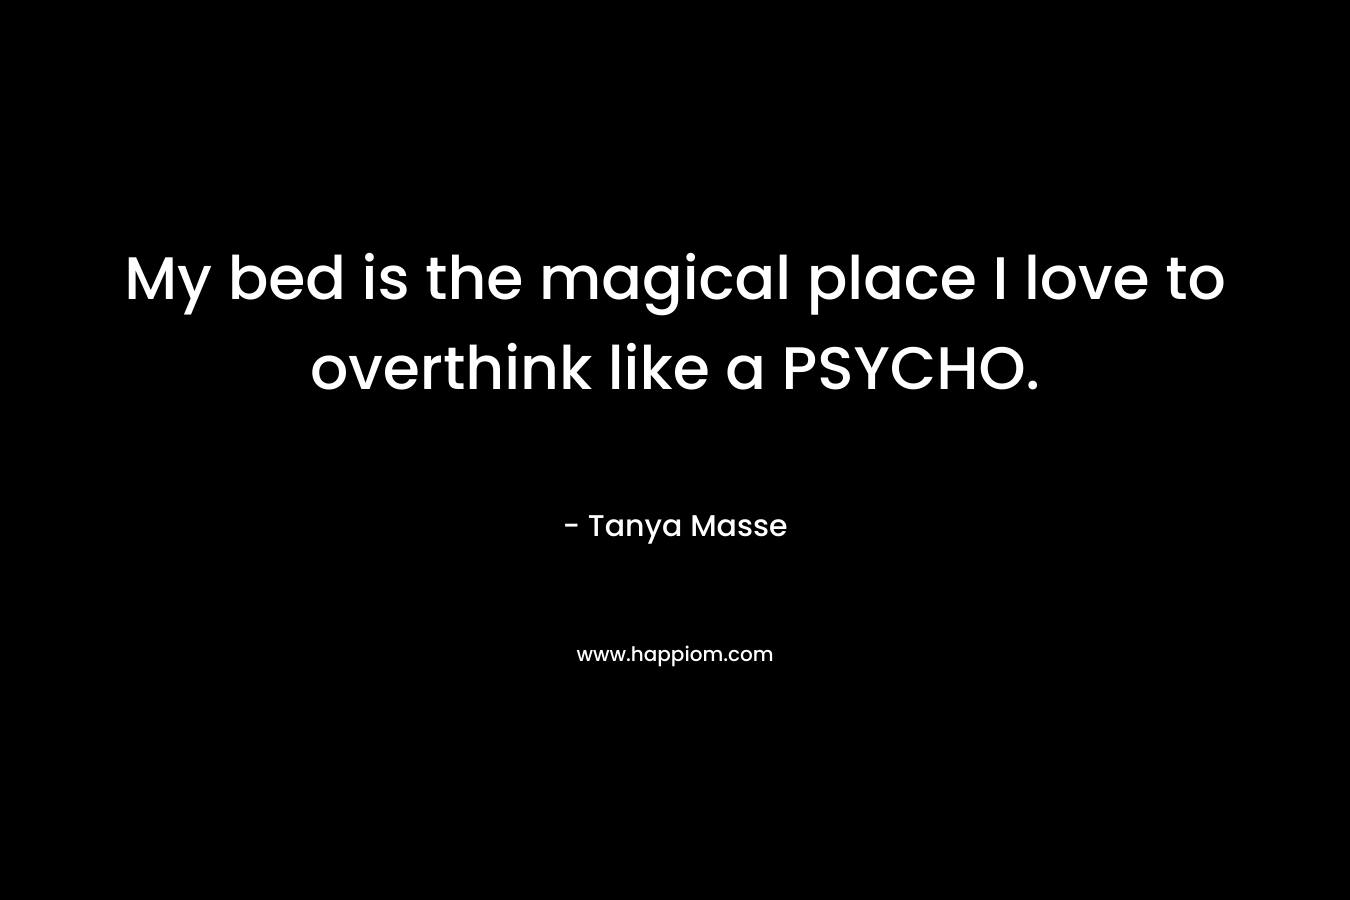 My bed is the magical place I love to overthink like a PSYCHO.